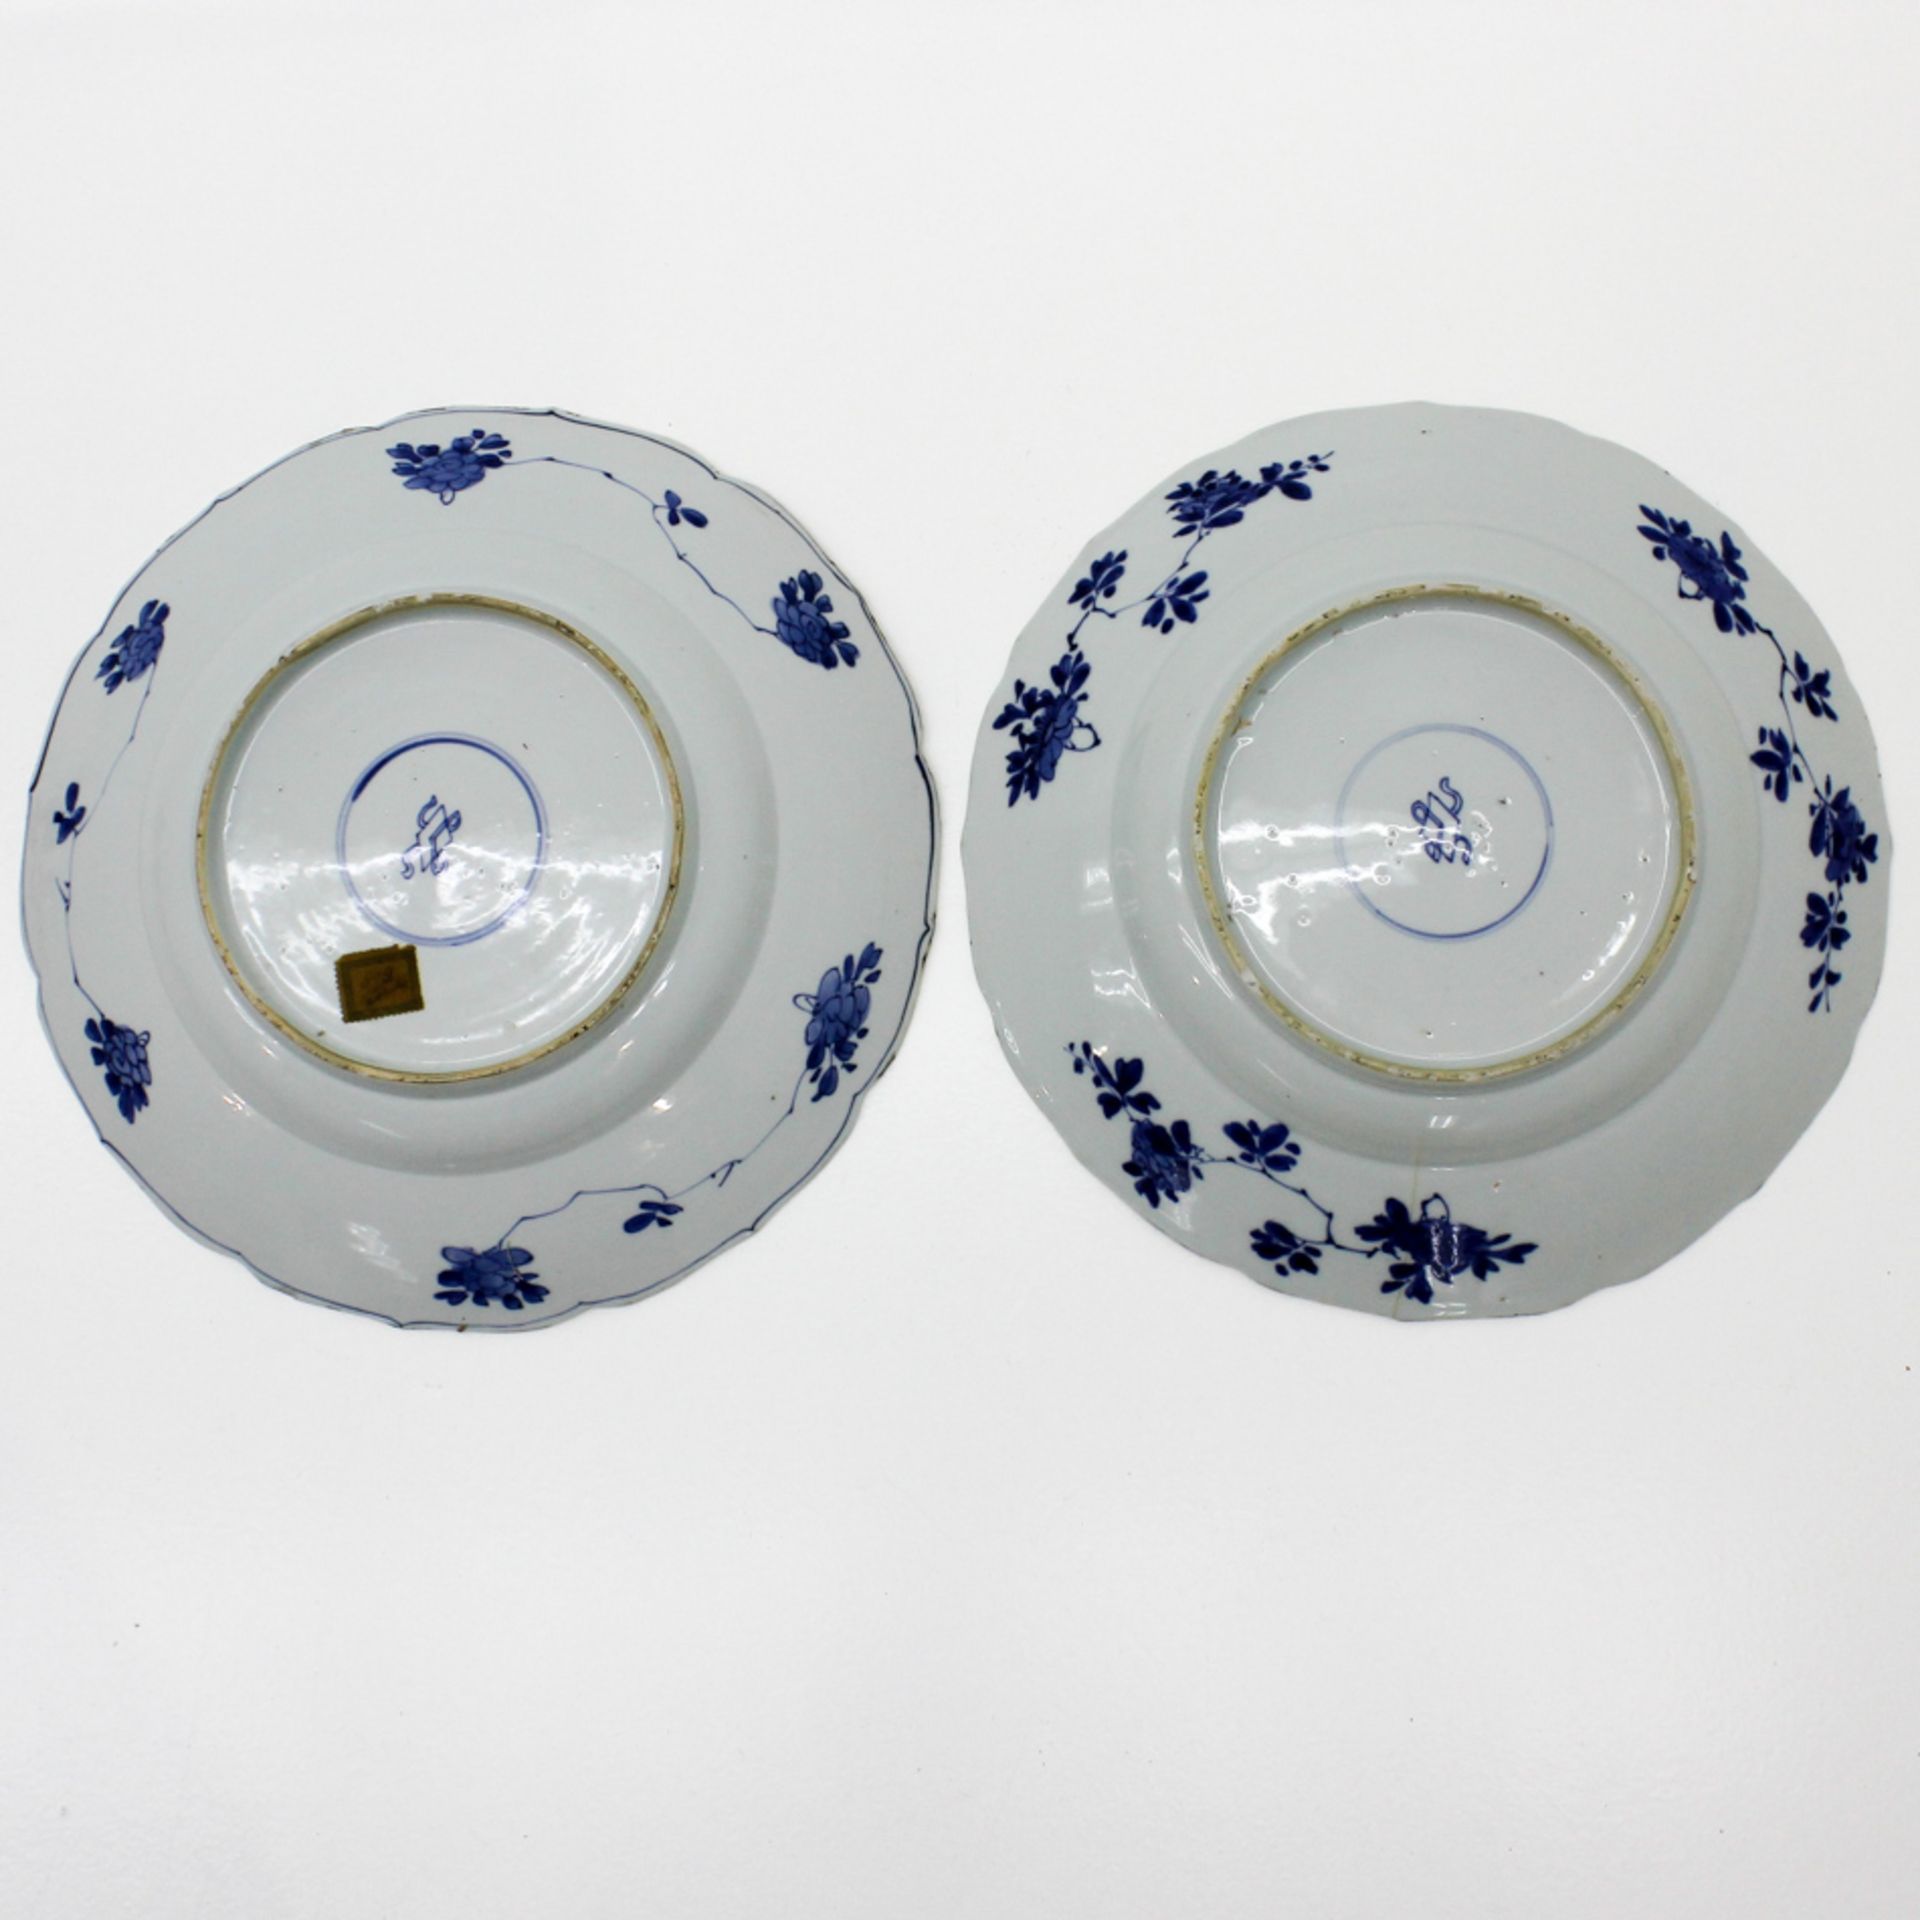 A Fine Lot of 2 18th Century China Porcelain Kang-shi In full blue and white floral decor, very fine - Bild 2 aus 2